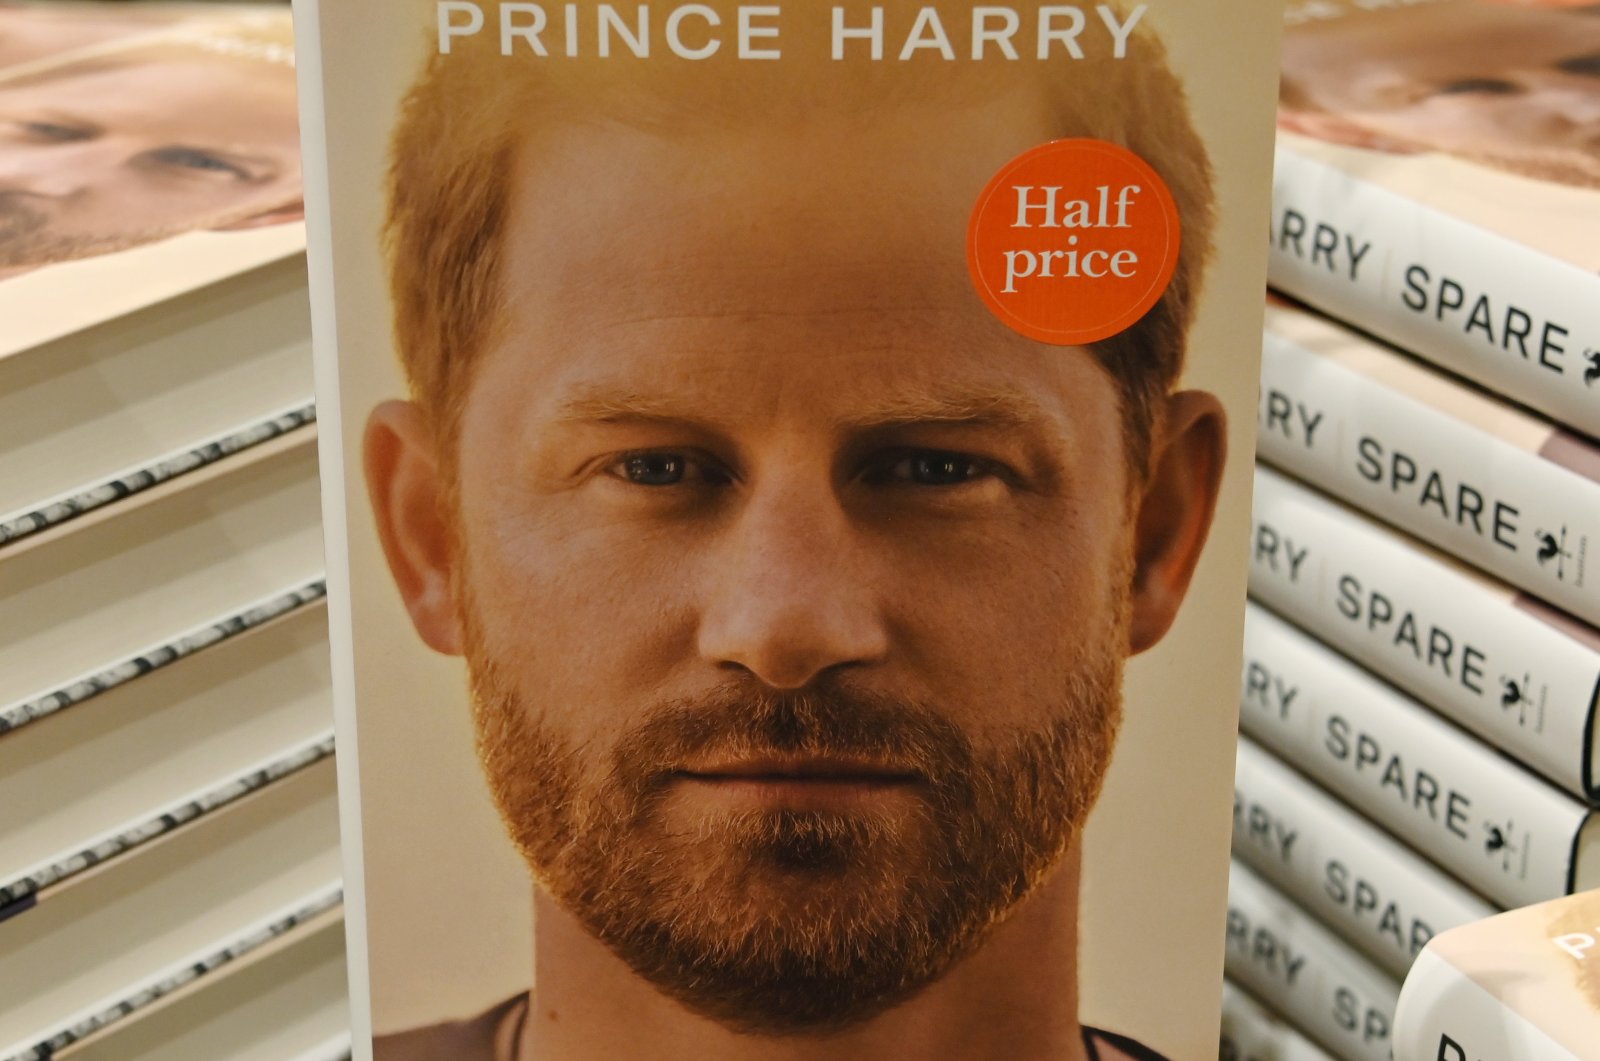 Prince Harry&#039;s new book &quot;Spare&quot; is displayed at a bookshop in London, U.K., Jan. 10, 2023. (EPA Photo)